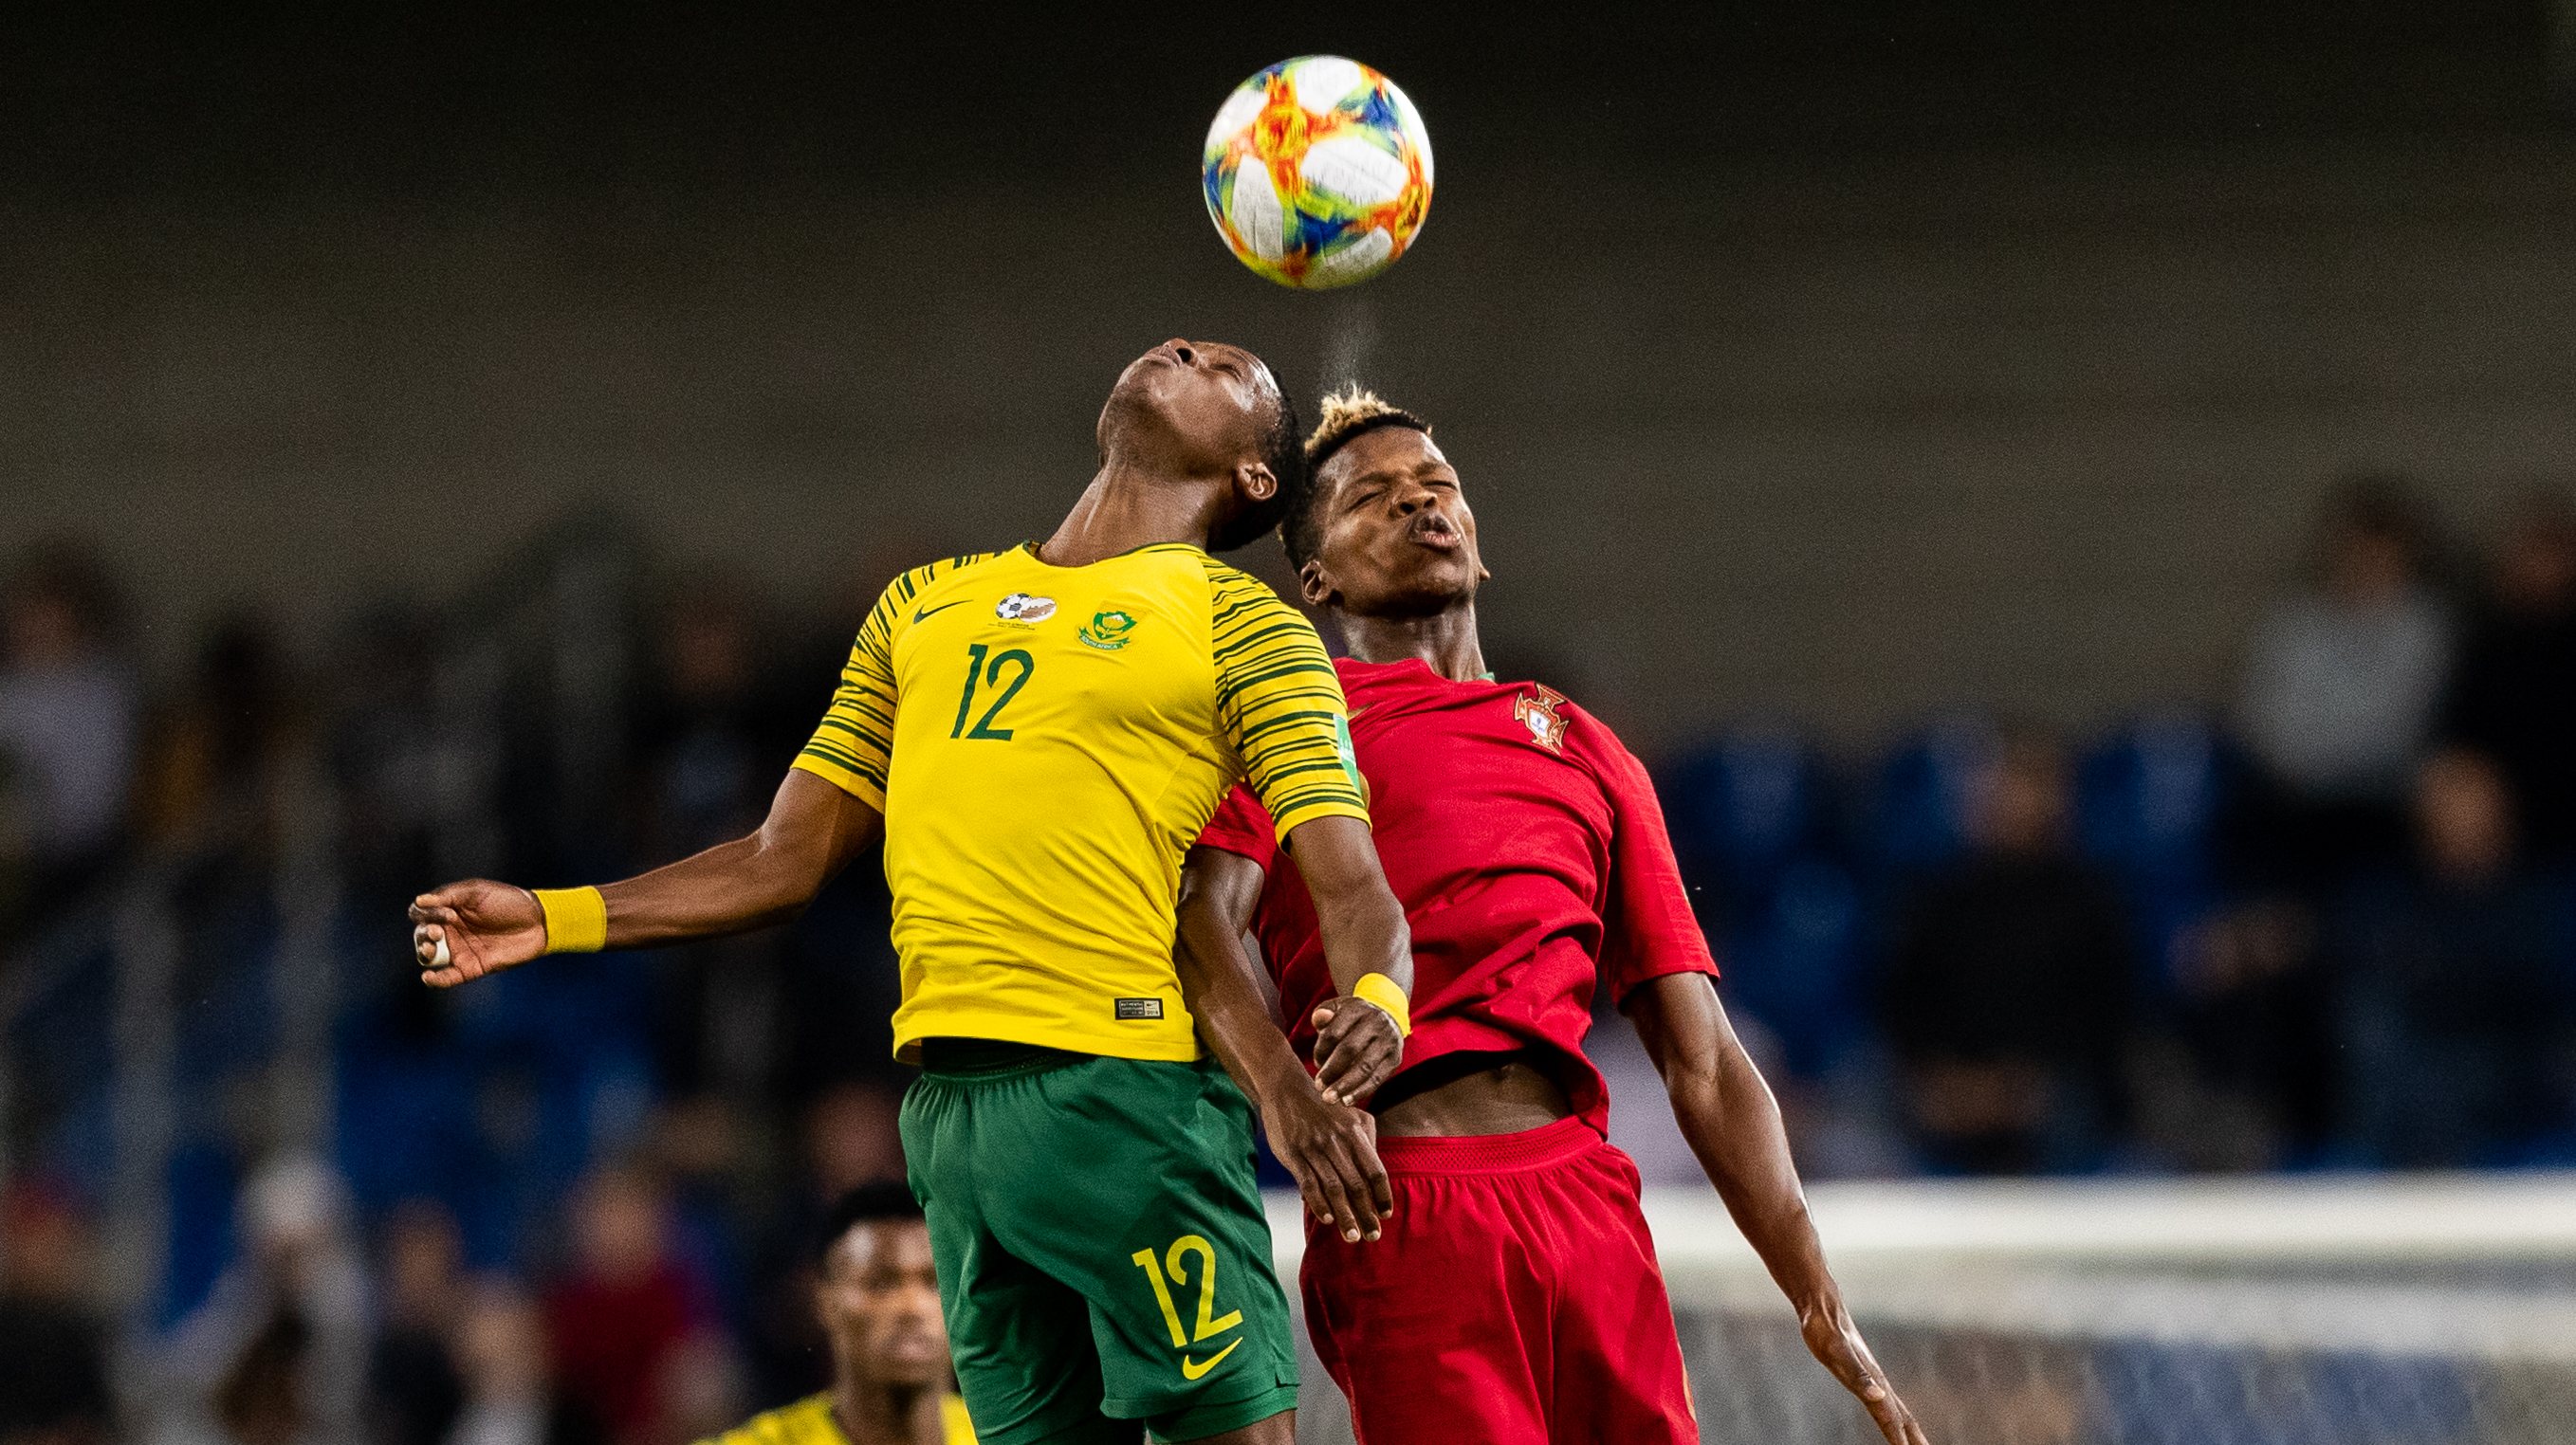 South Africa v Portugal: Group F - 2019 FIFA U-20 World Cup